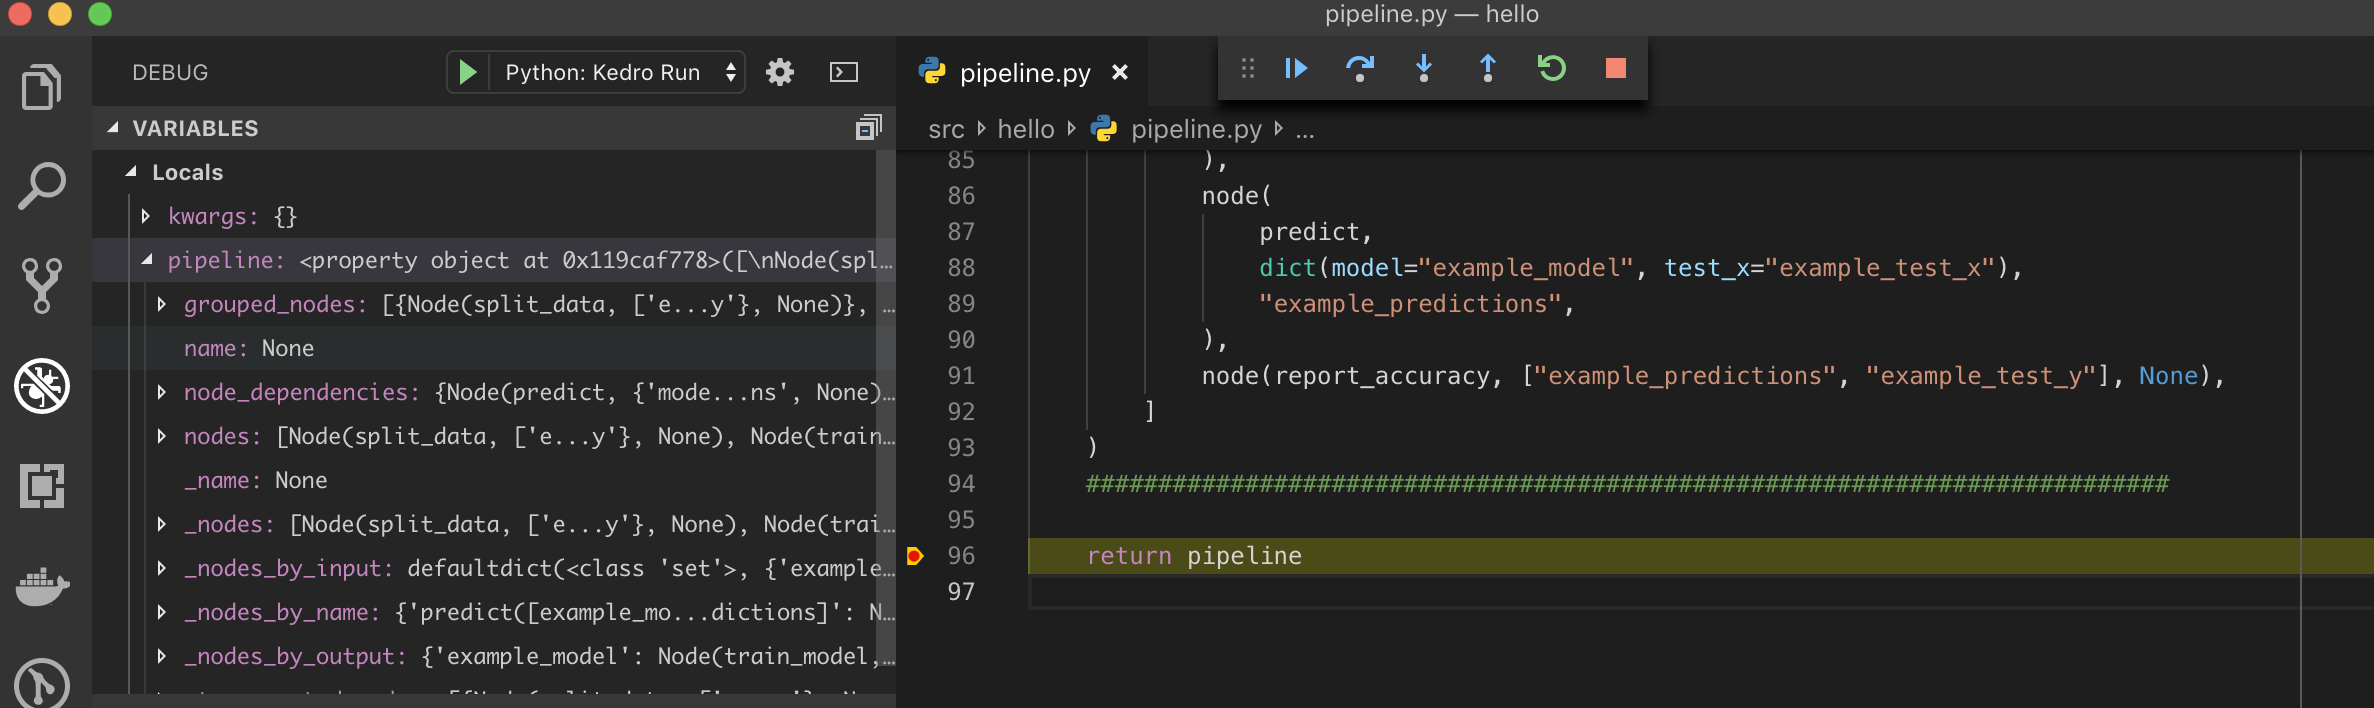 ../_images/vscode_breakpoint.png